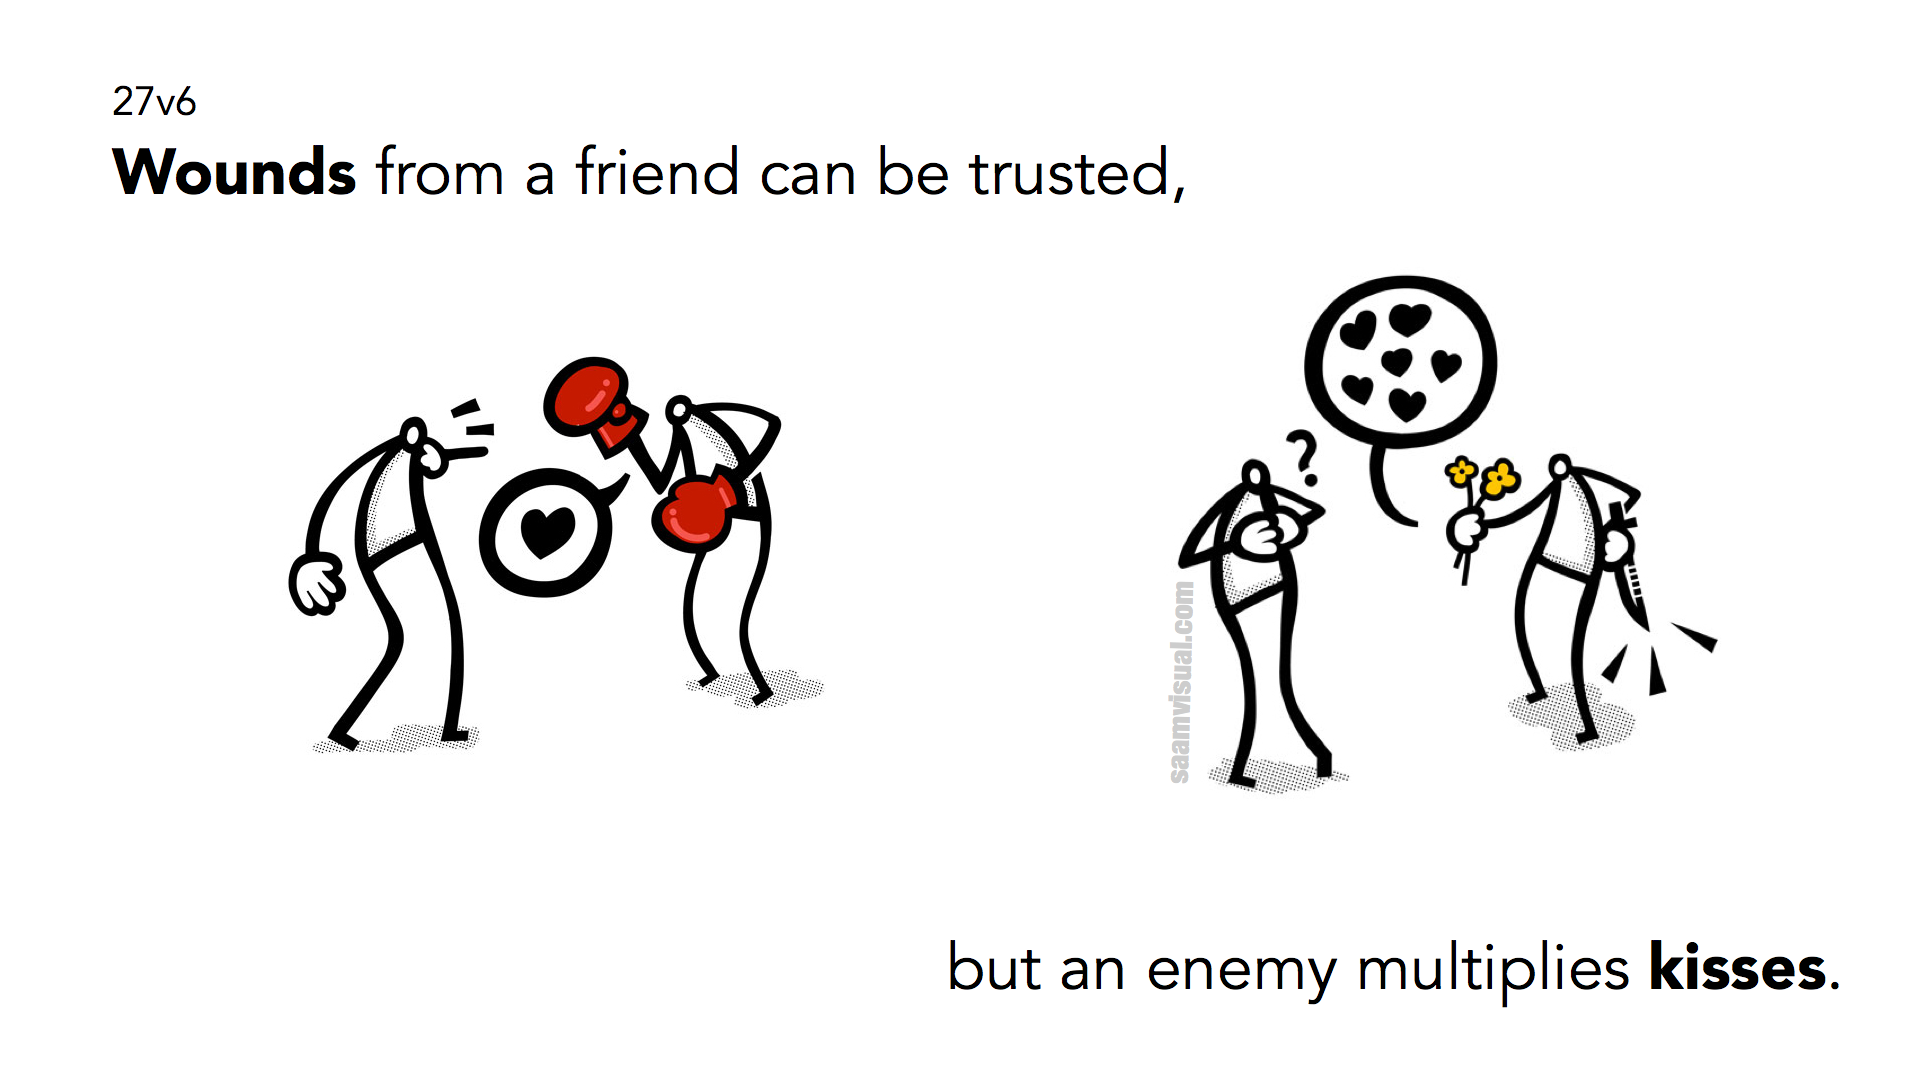 4woundsfromafriendcanbetrusted.png